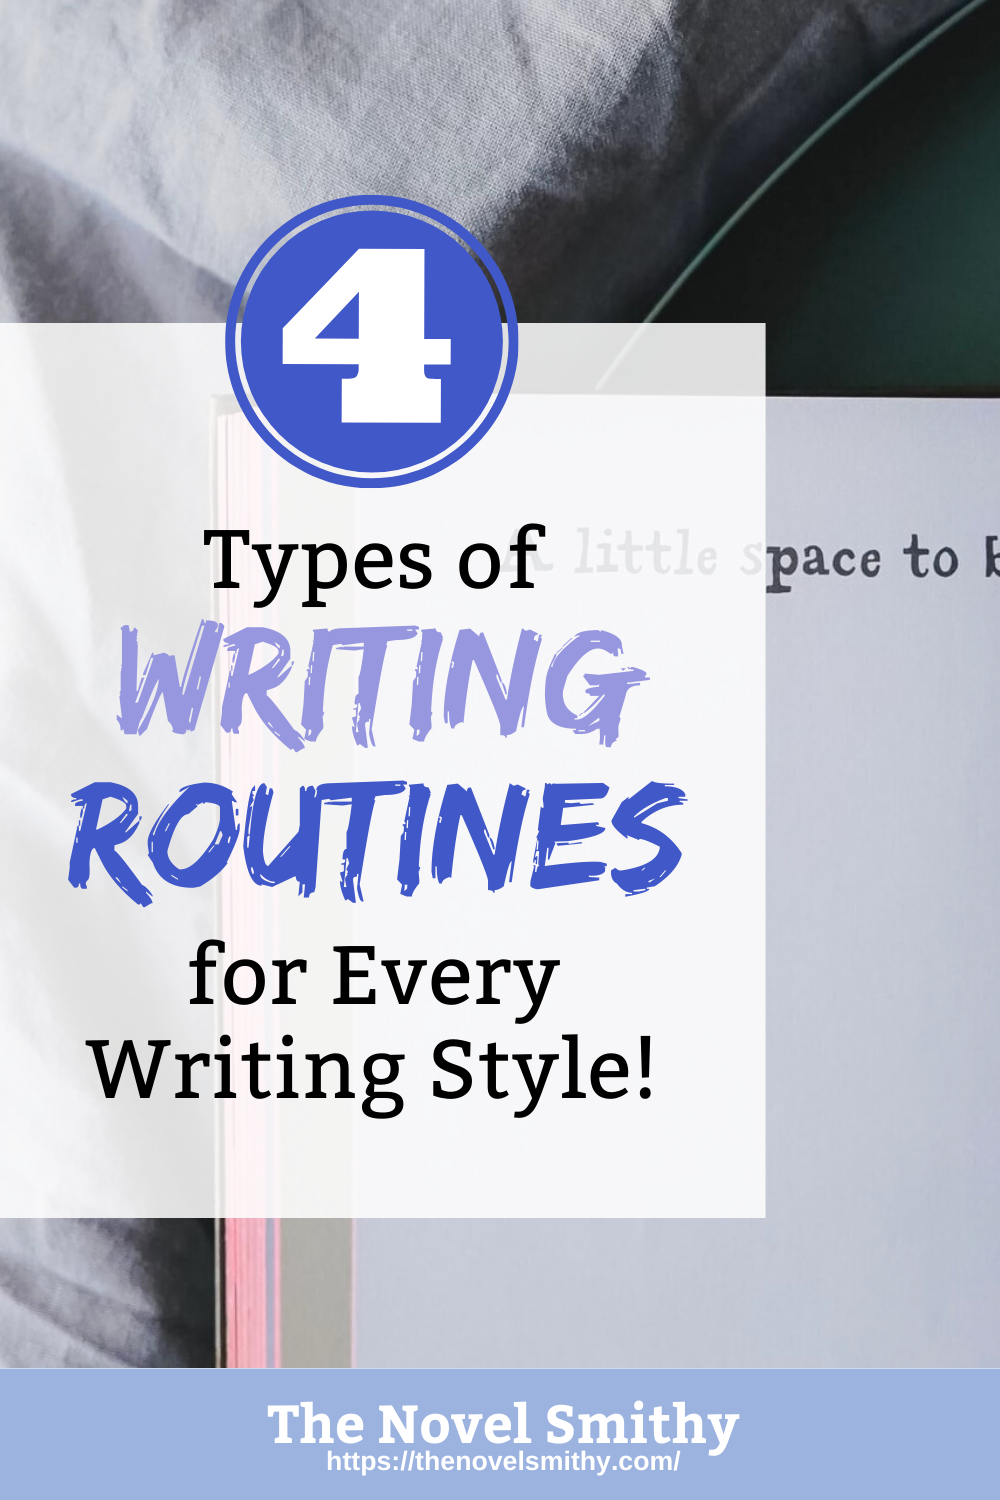 Do You Need a Writing Routine?